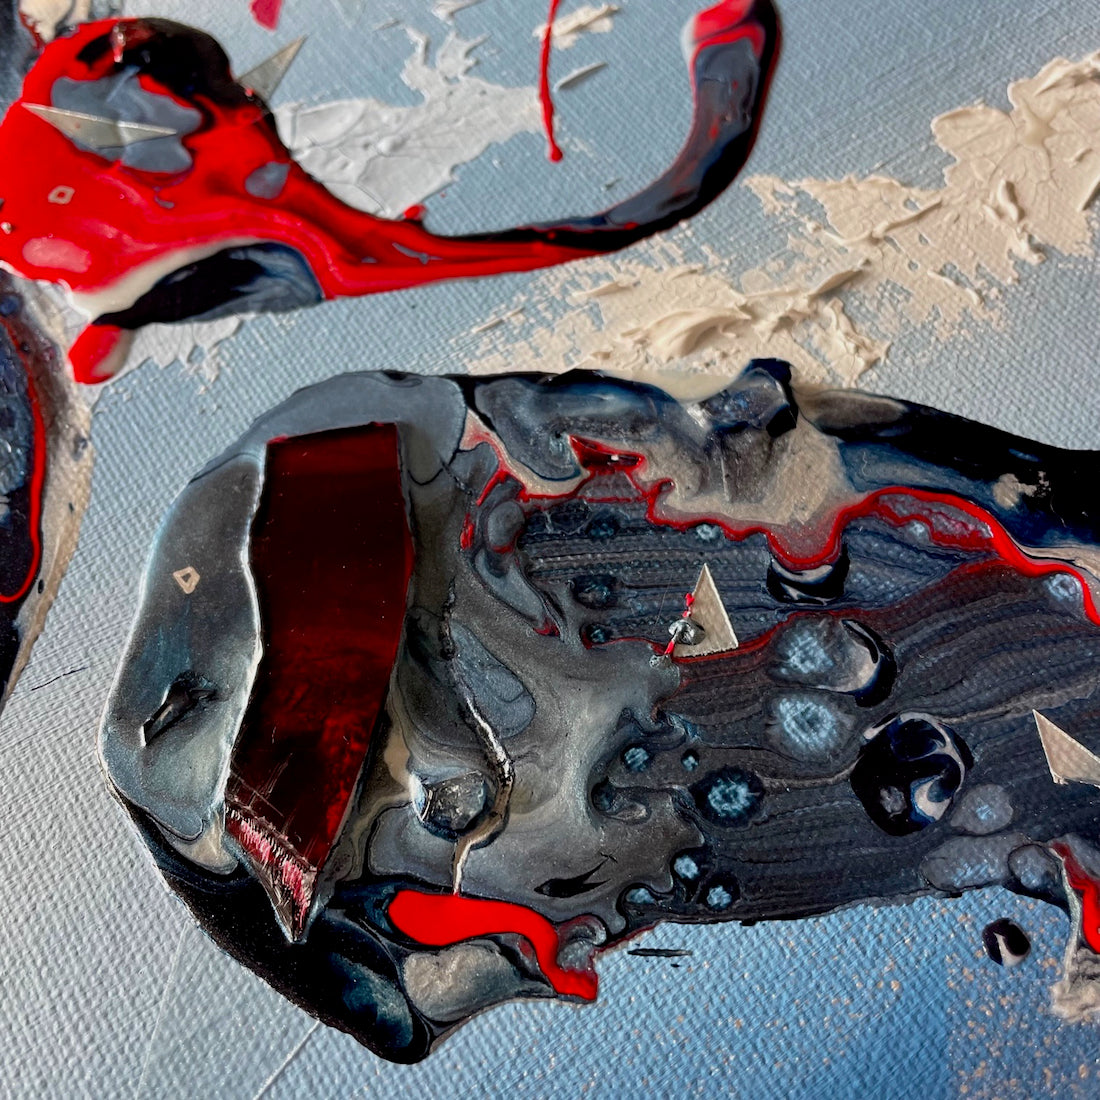 beautiful abstract art incorporating broken glass and car wreckage from an auto accident